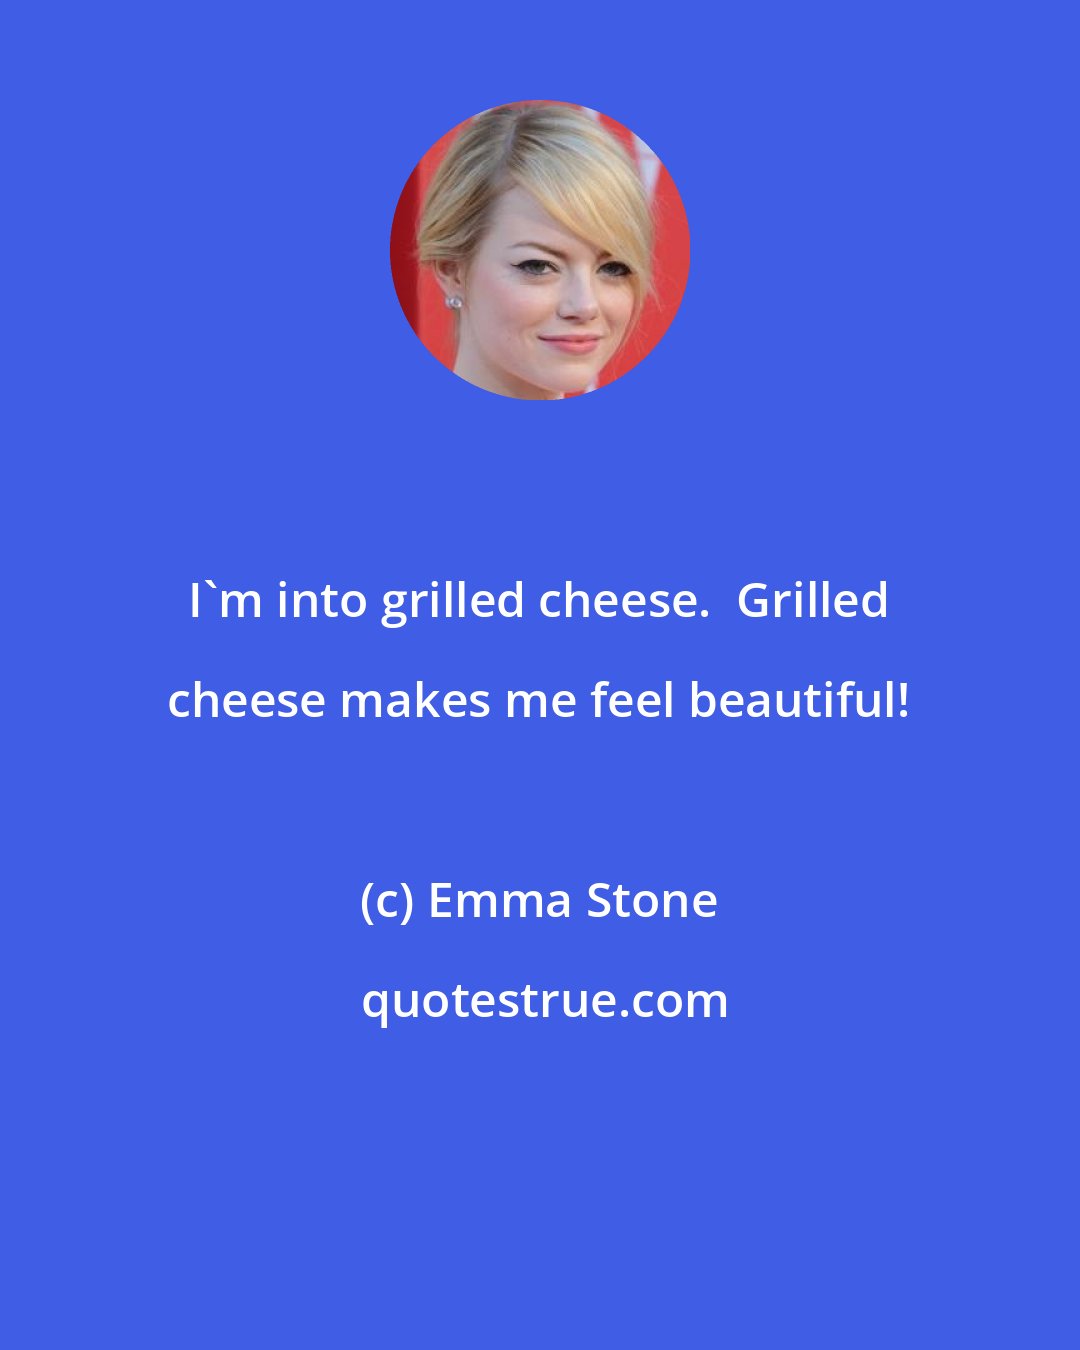 Emma Stone: I'm into grilled cheese.  Grilled cheese makes me feel beautiful!